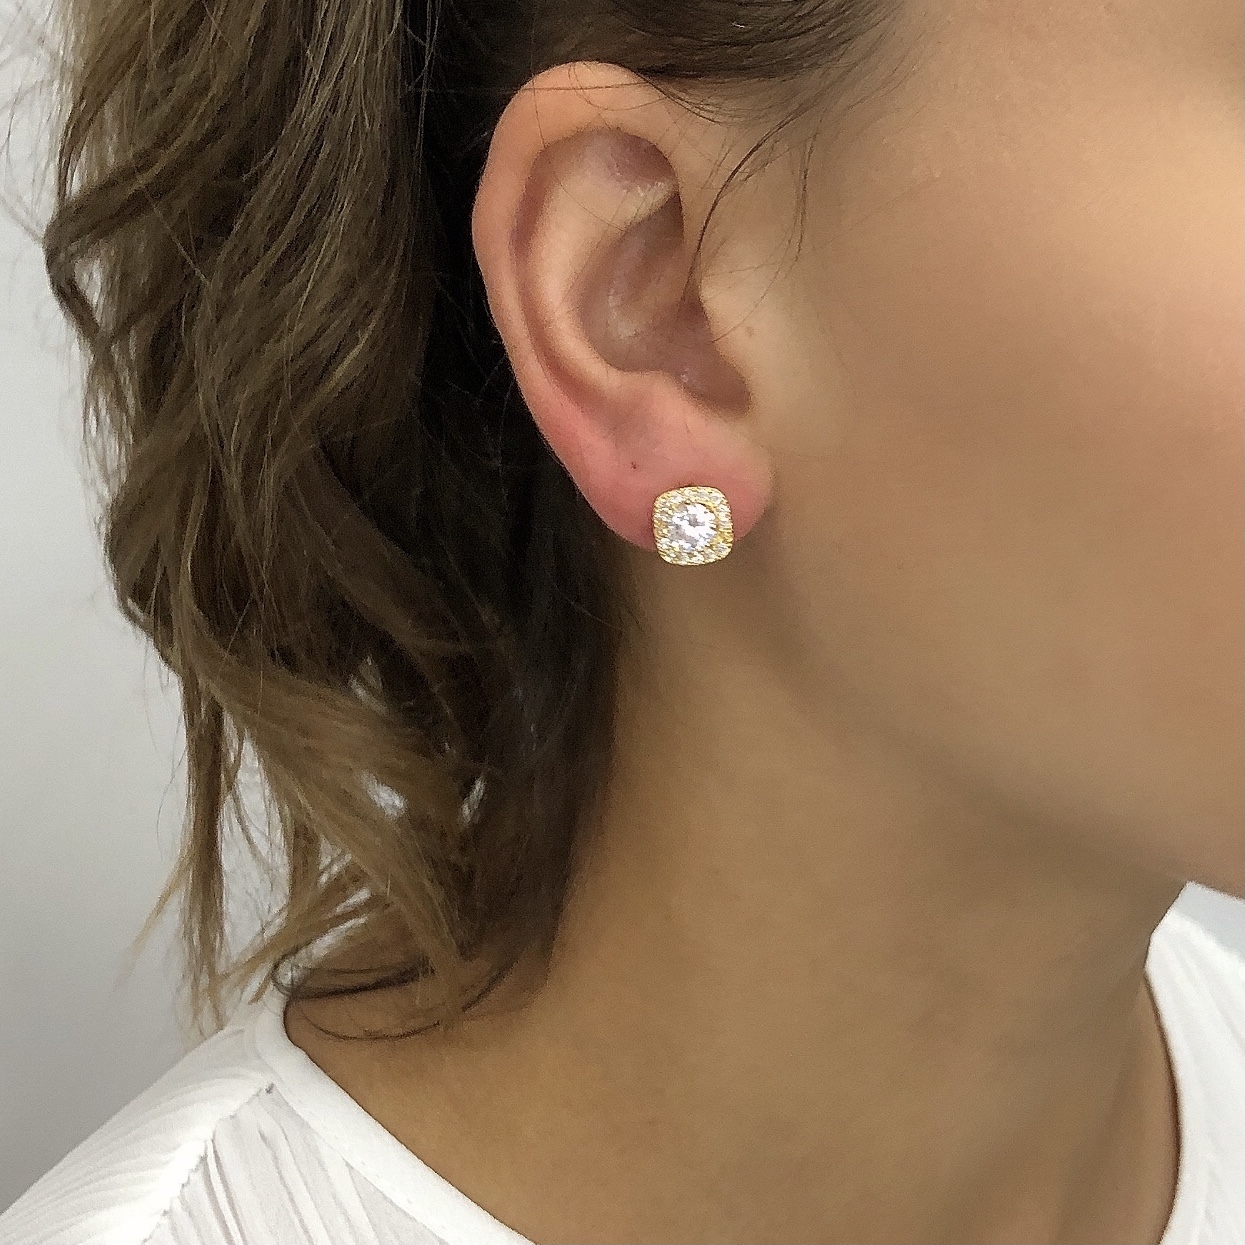 Petite crystal studs are the perfect finishing touch to complete your look as an everyday earring, adding a bit of sparkle. Small studs are chosen by brides when wearing a larger headpiece and just need to complete the look with a small bridal earring. A great gift for your bride tribe, studs are a versatile choice that are re-wearable after the day but still works perfectly to add a bit of sparkle. You really can't go wrong with these pretties no matter the occasion. Made of cubic zircon, allergy and nickel free posts.